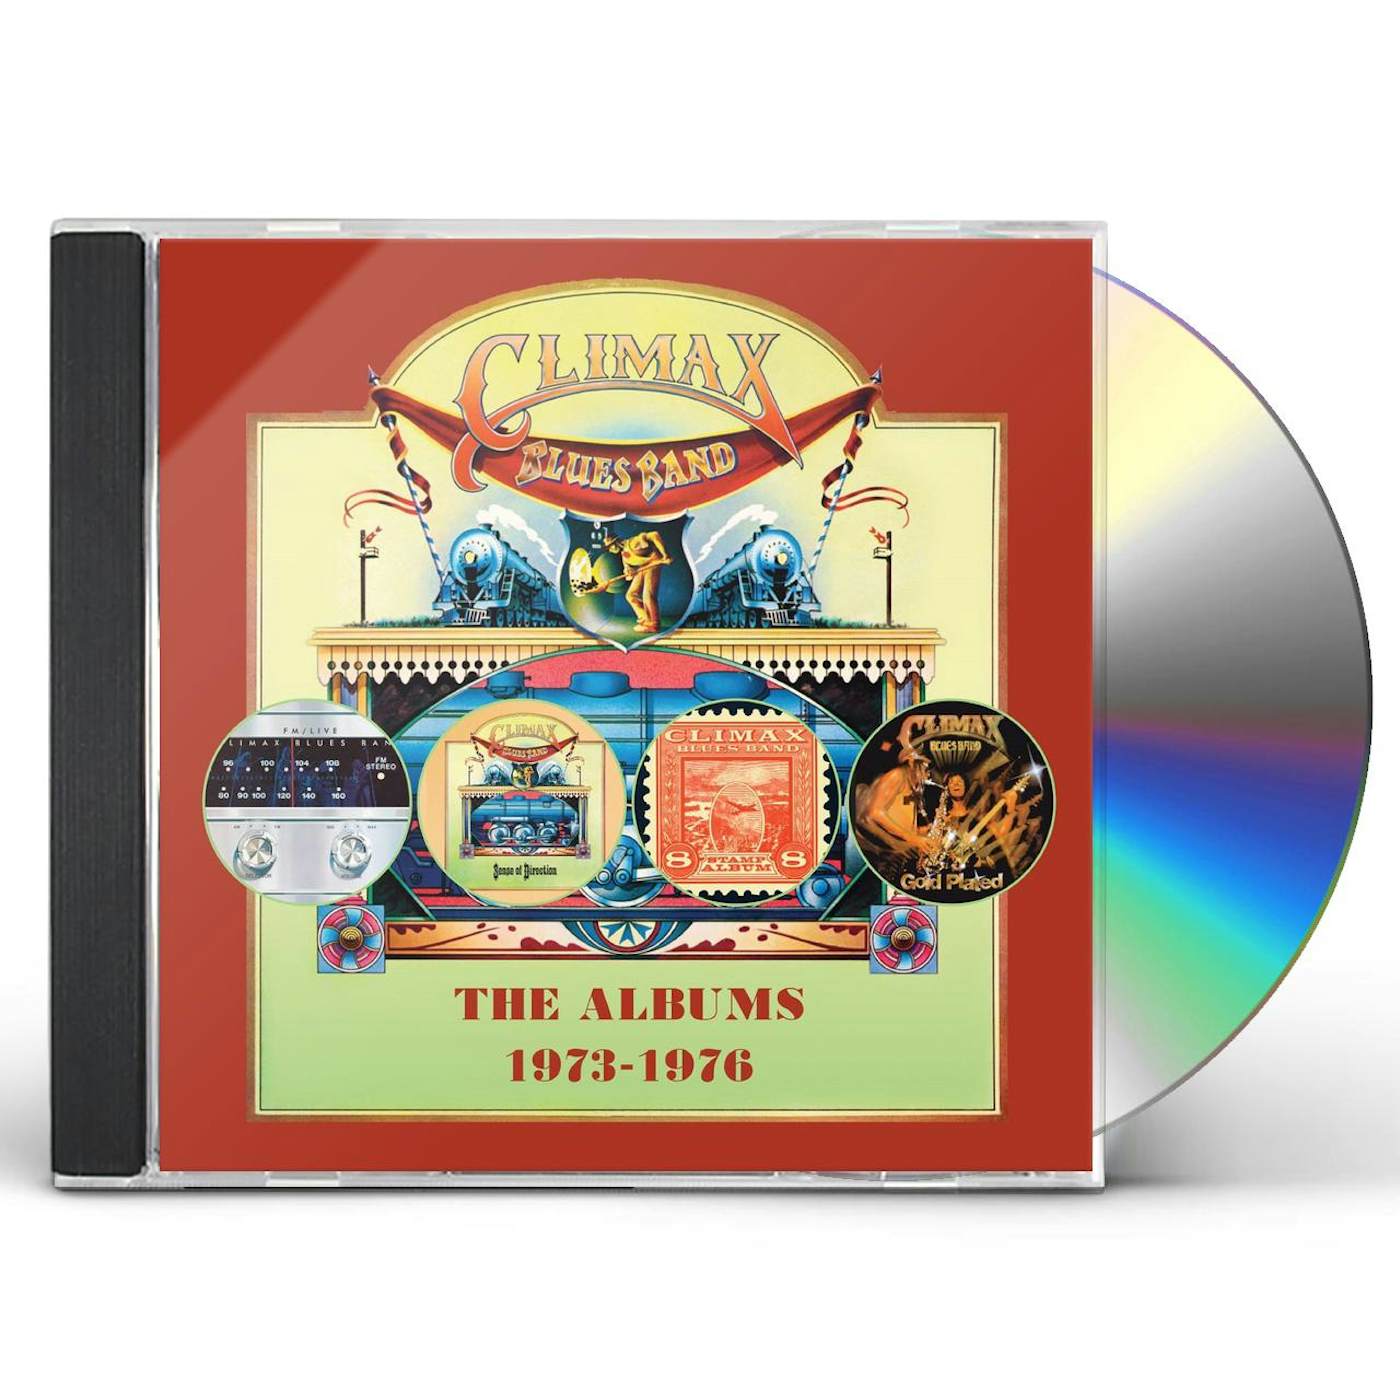 Climax Blues Band ALBUMS 1973-1976 CD